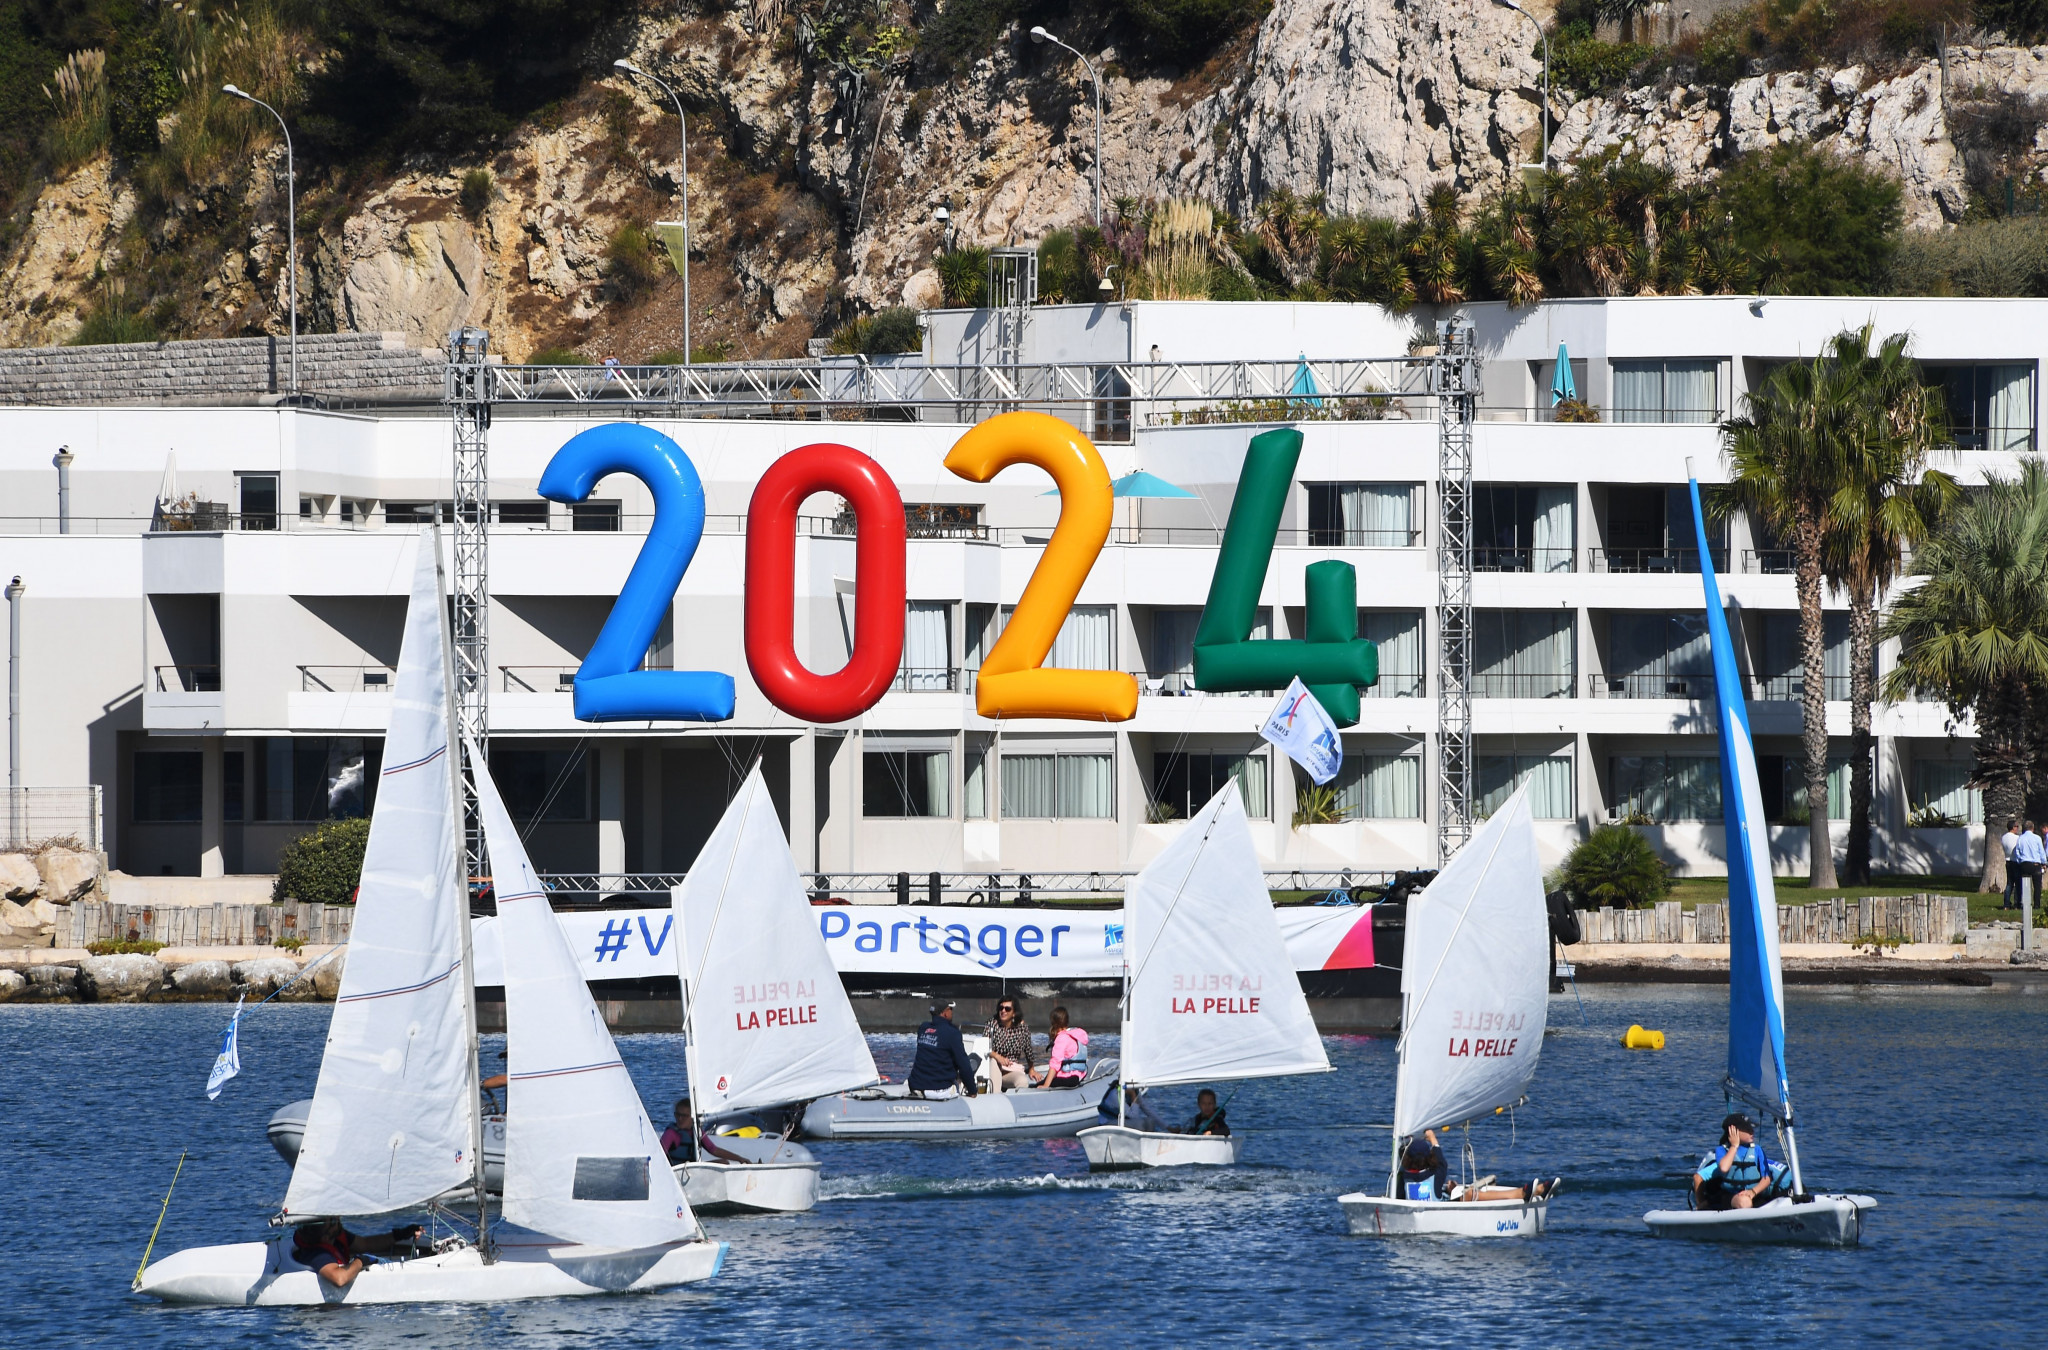 Local authorities in Marseille have abandoned plans to build a 5,000-seat grandstand for the Paris 2024 sailing event ©Getty Images